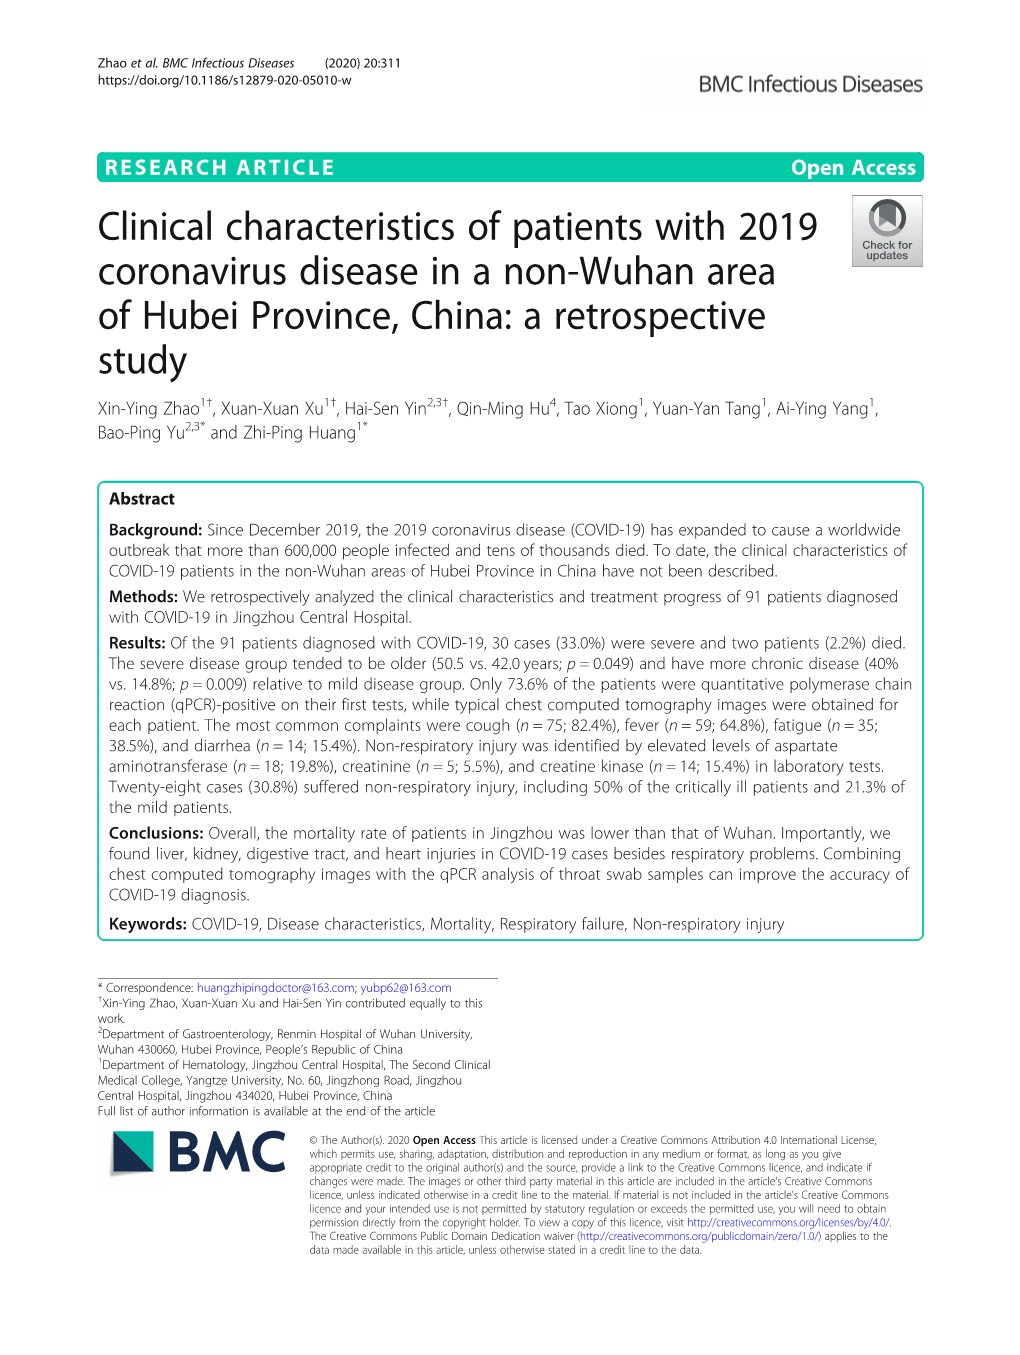 Clinical Characteristics of Patients with 2019 Coronavirus Disease in a Non